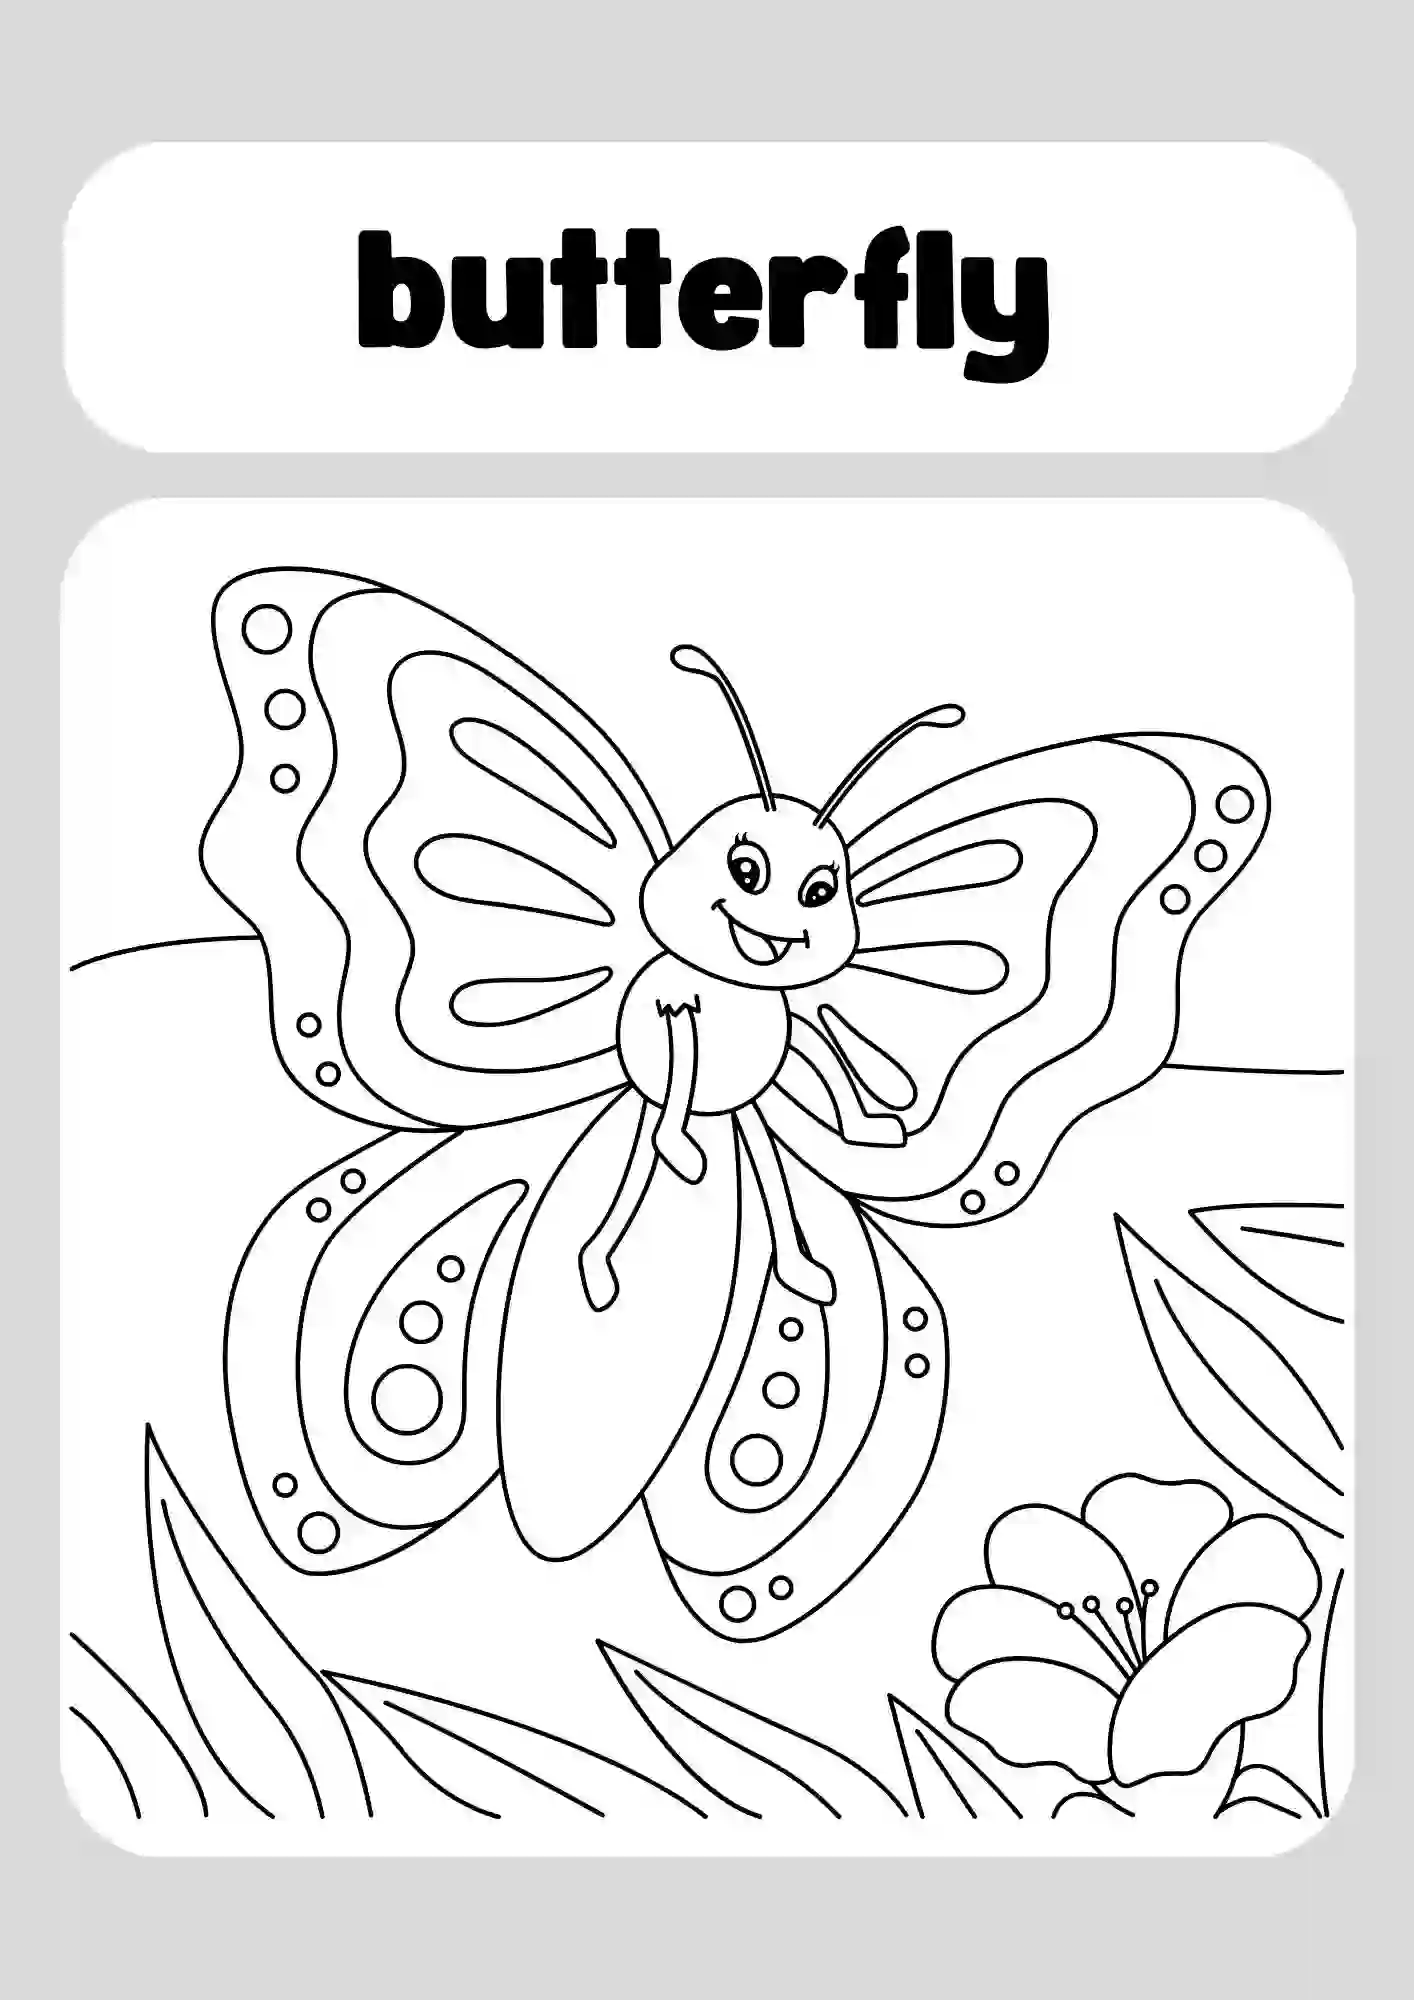 Insects Coloring Worksheets for Kindergarten (butterfly)